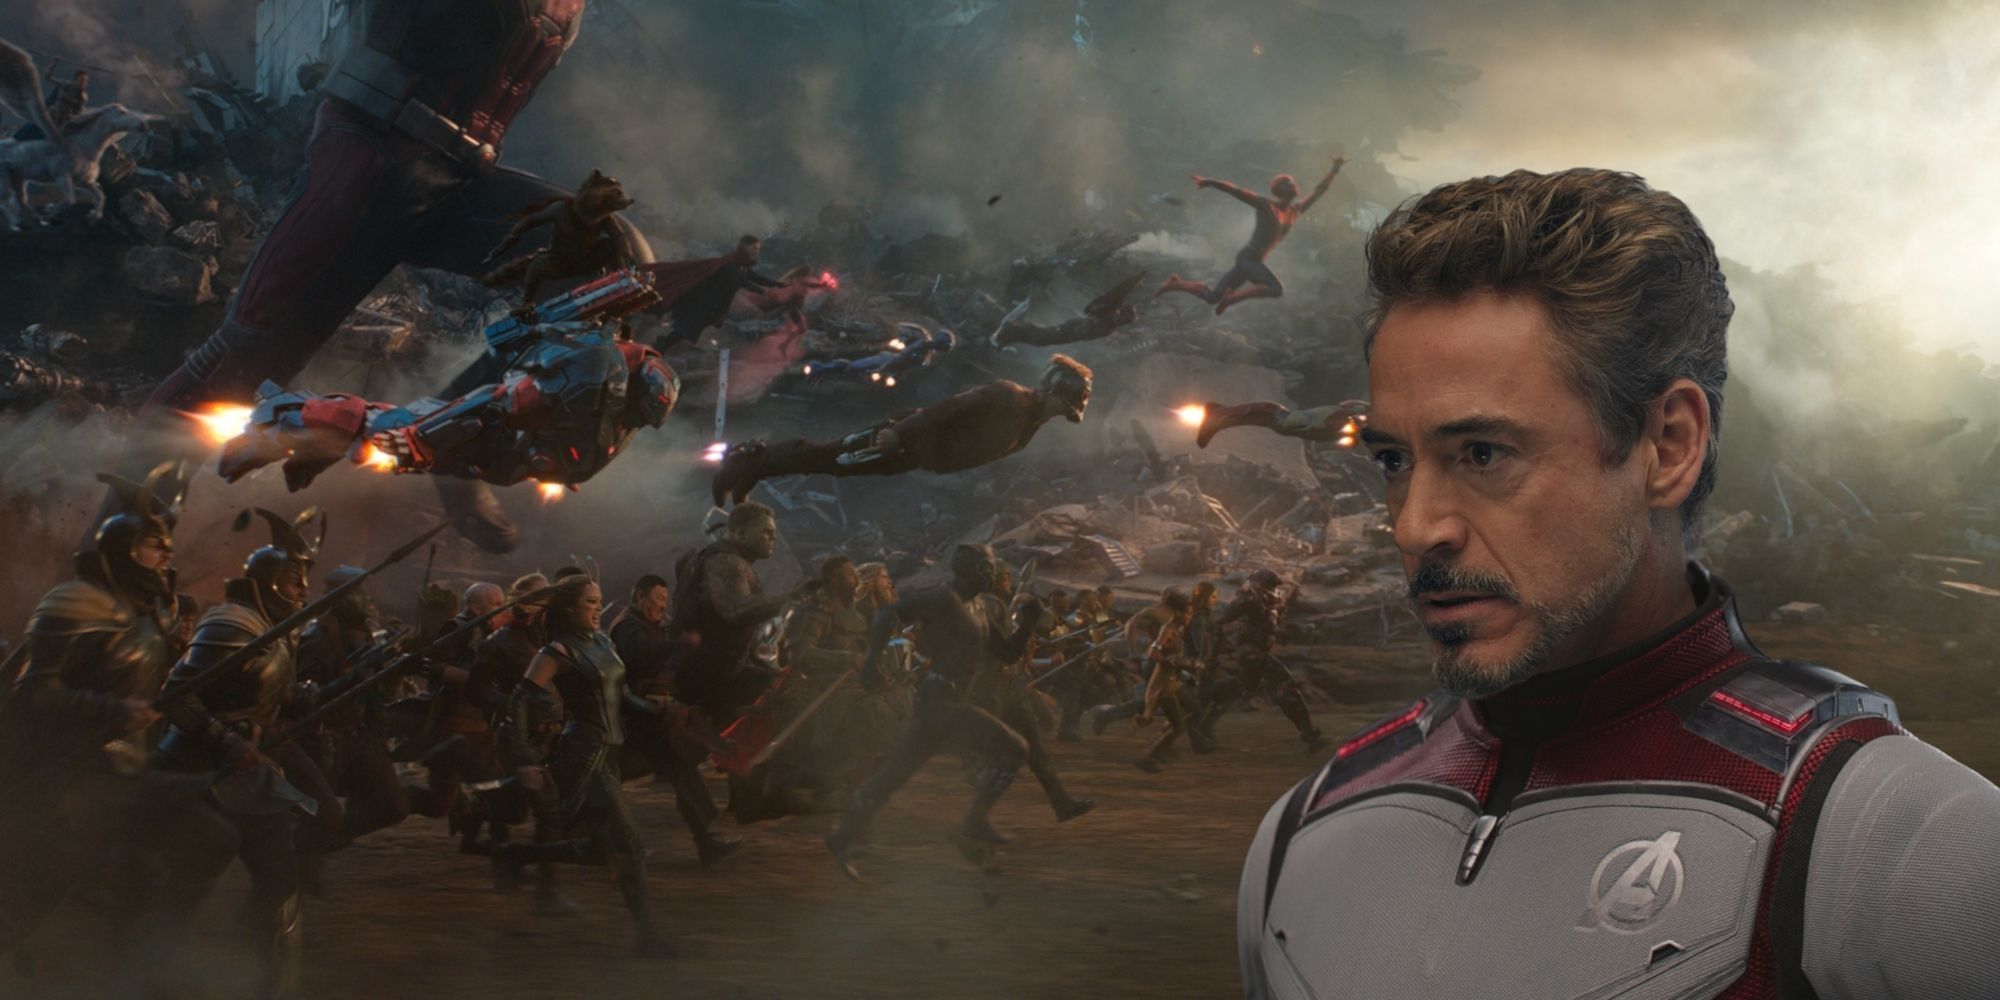 Marvel Avengers End Game Battle Scene with all characters, Robert Downey Jr as Tony Stark